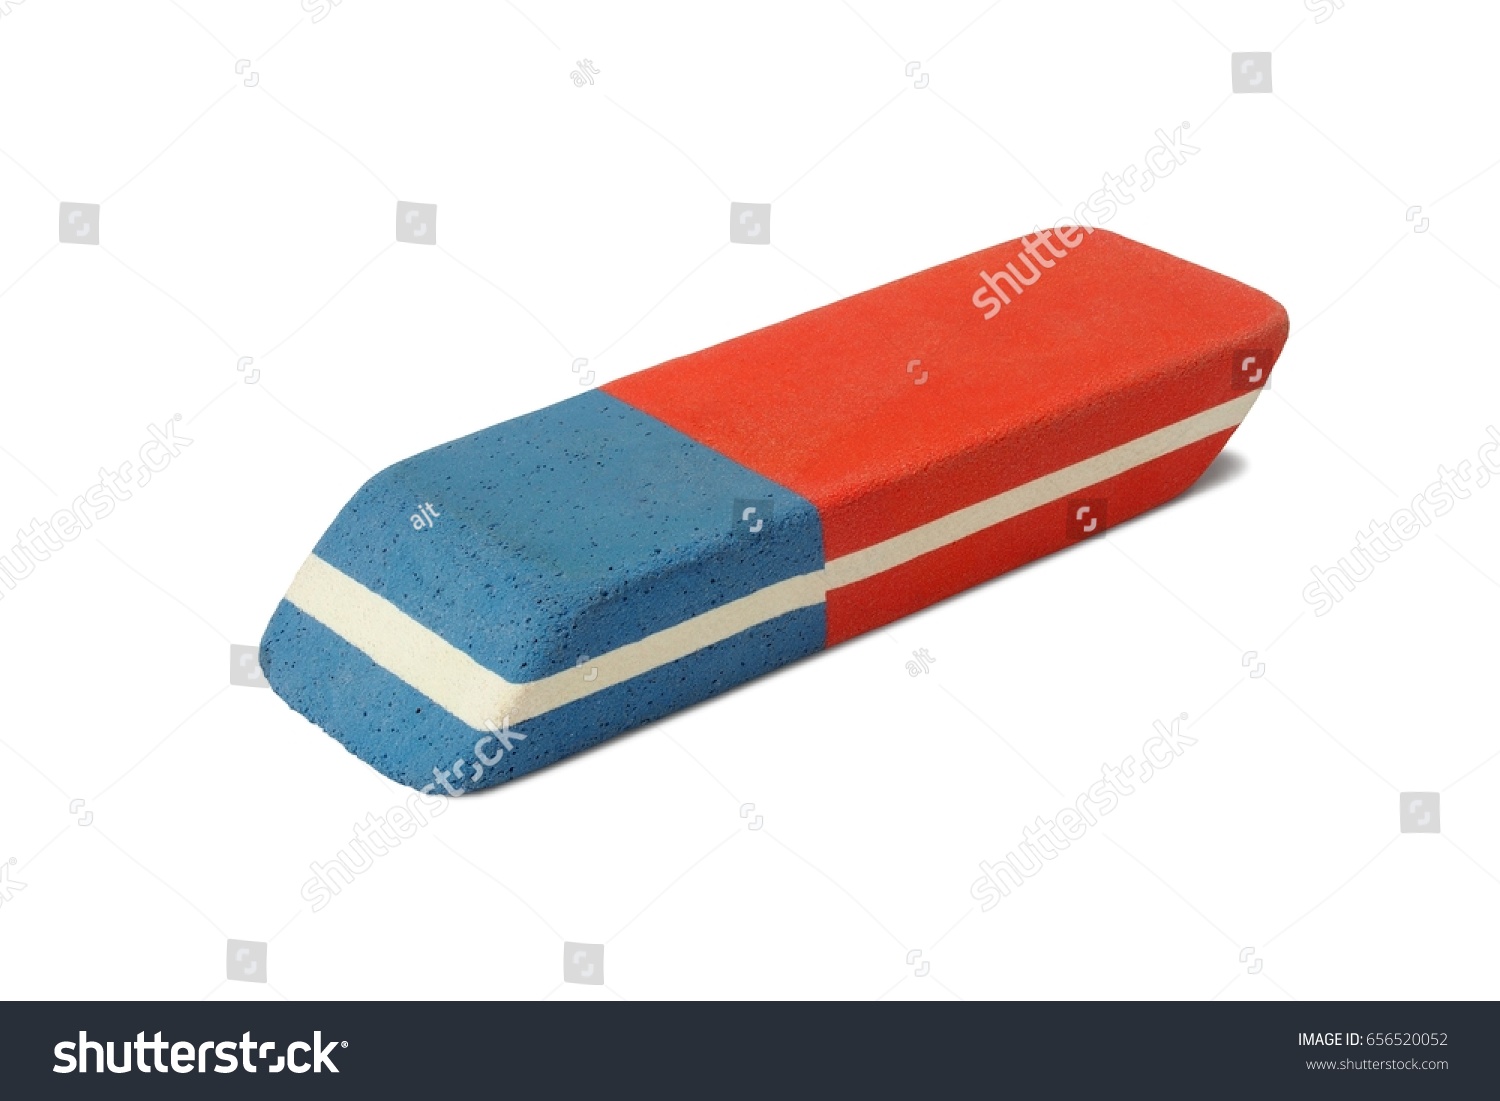 Rubber eraser for pencil and ink pen isolated on white background #656520052